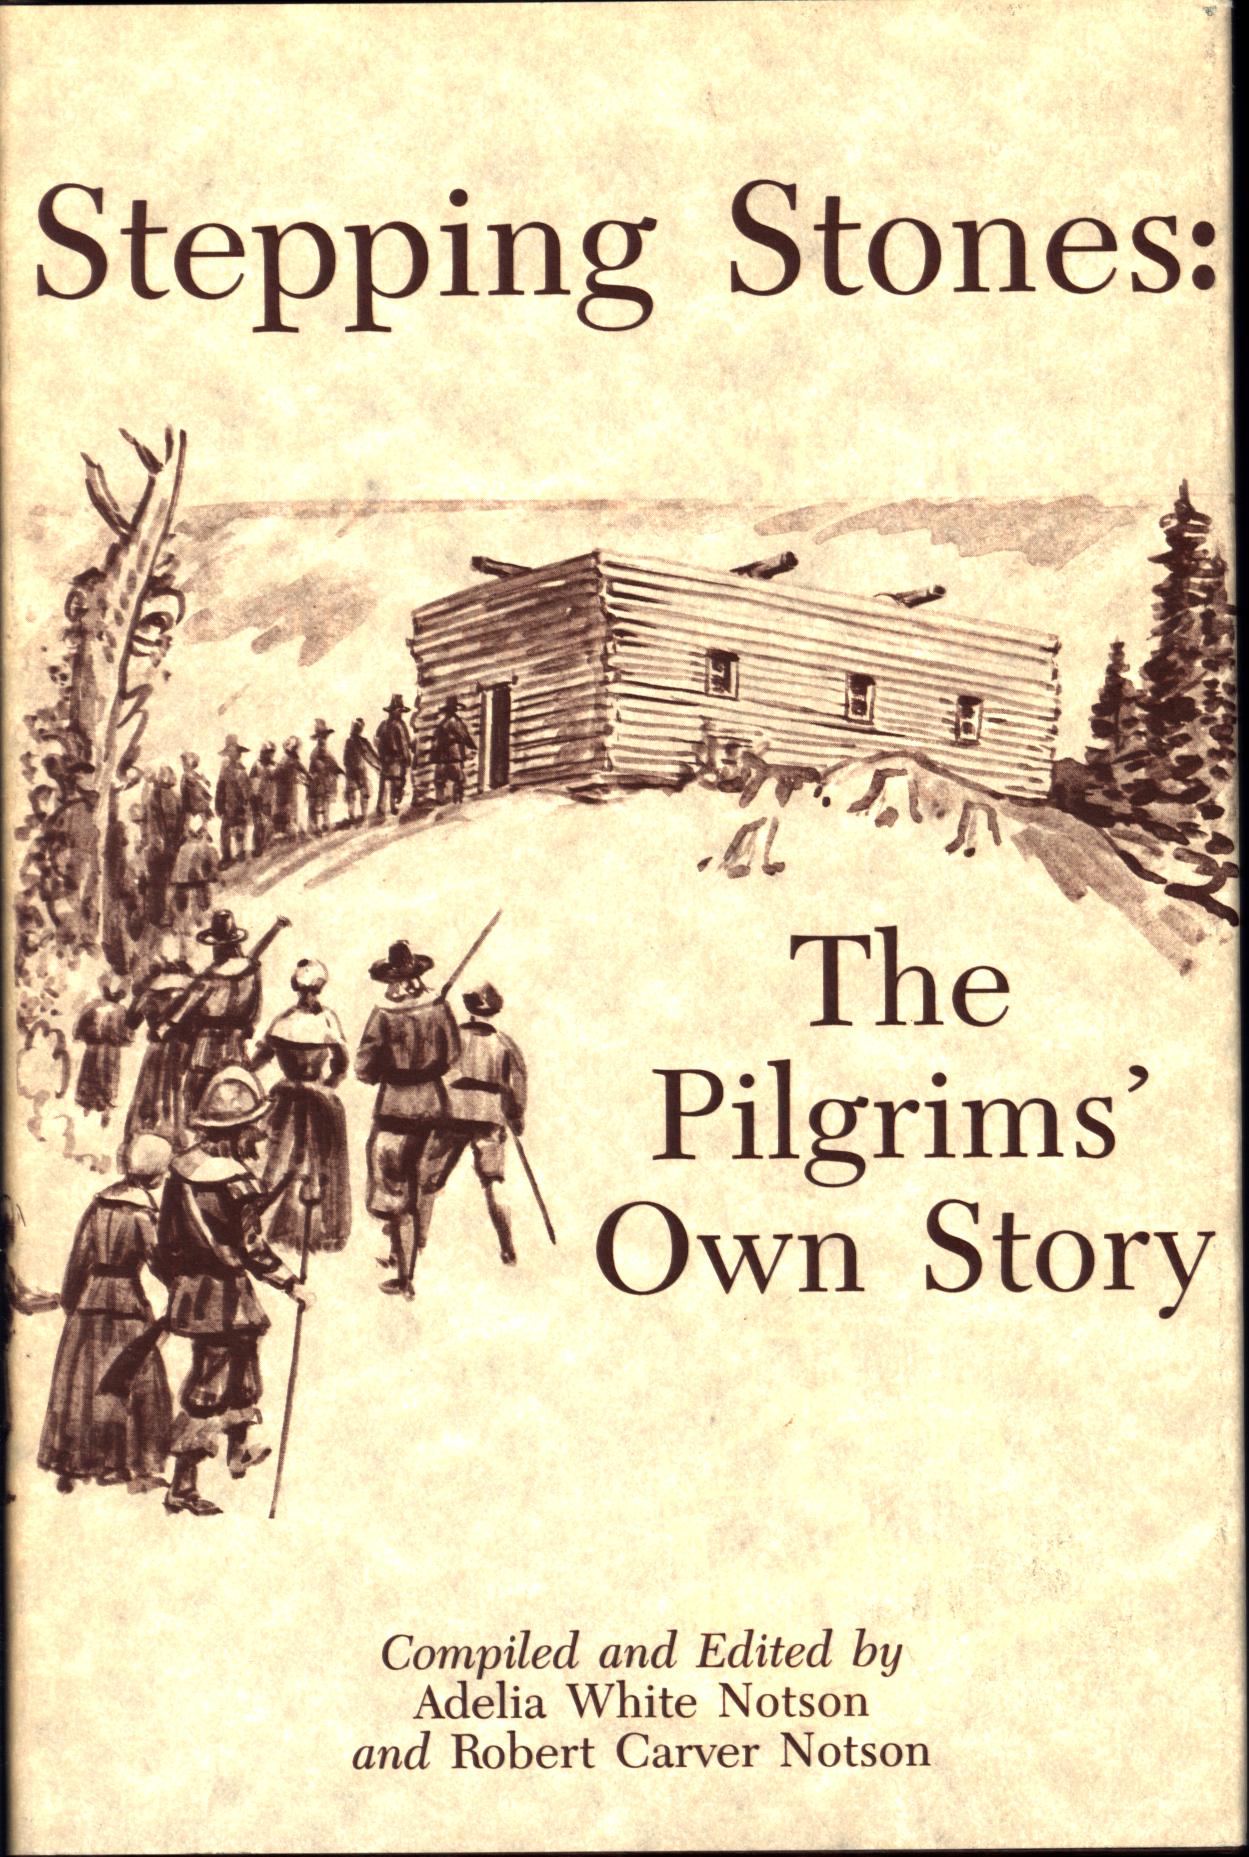 STEPPING STONES: the Pilgrims' own story.